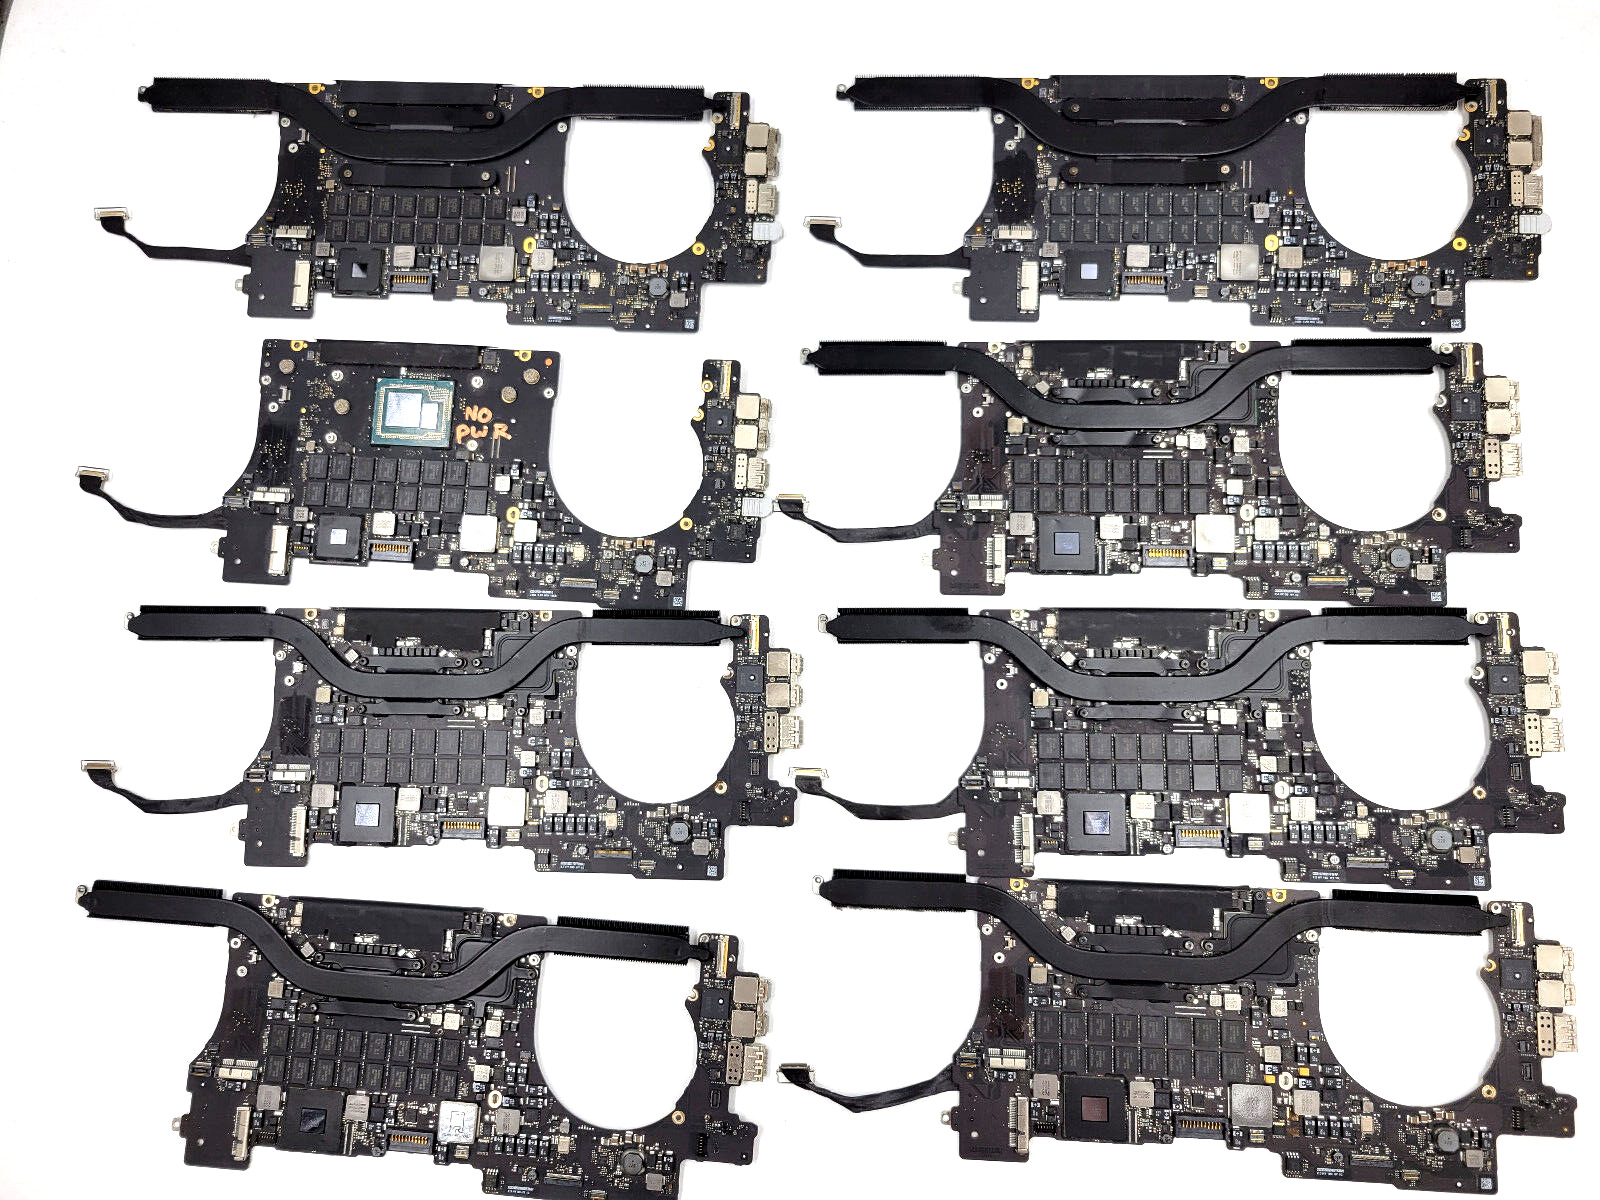 Lot of eight Macbook Pro A1398 2013/2014 Motherboards NON FUNCTIONAL PARTS ONLY